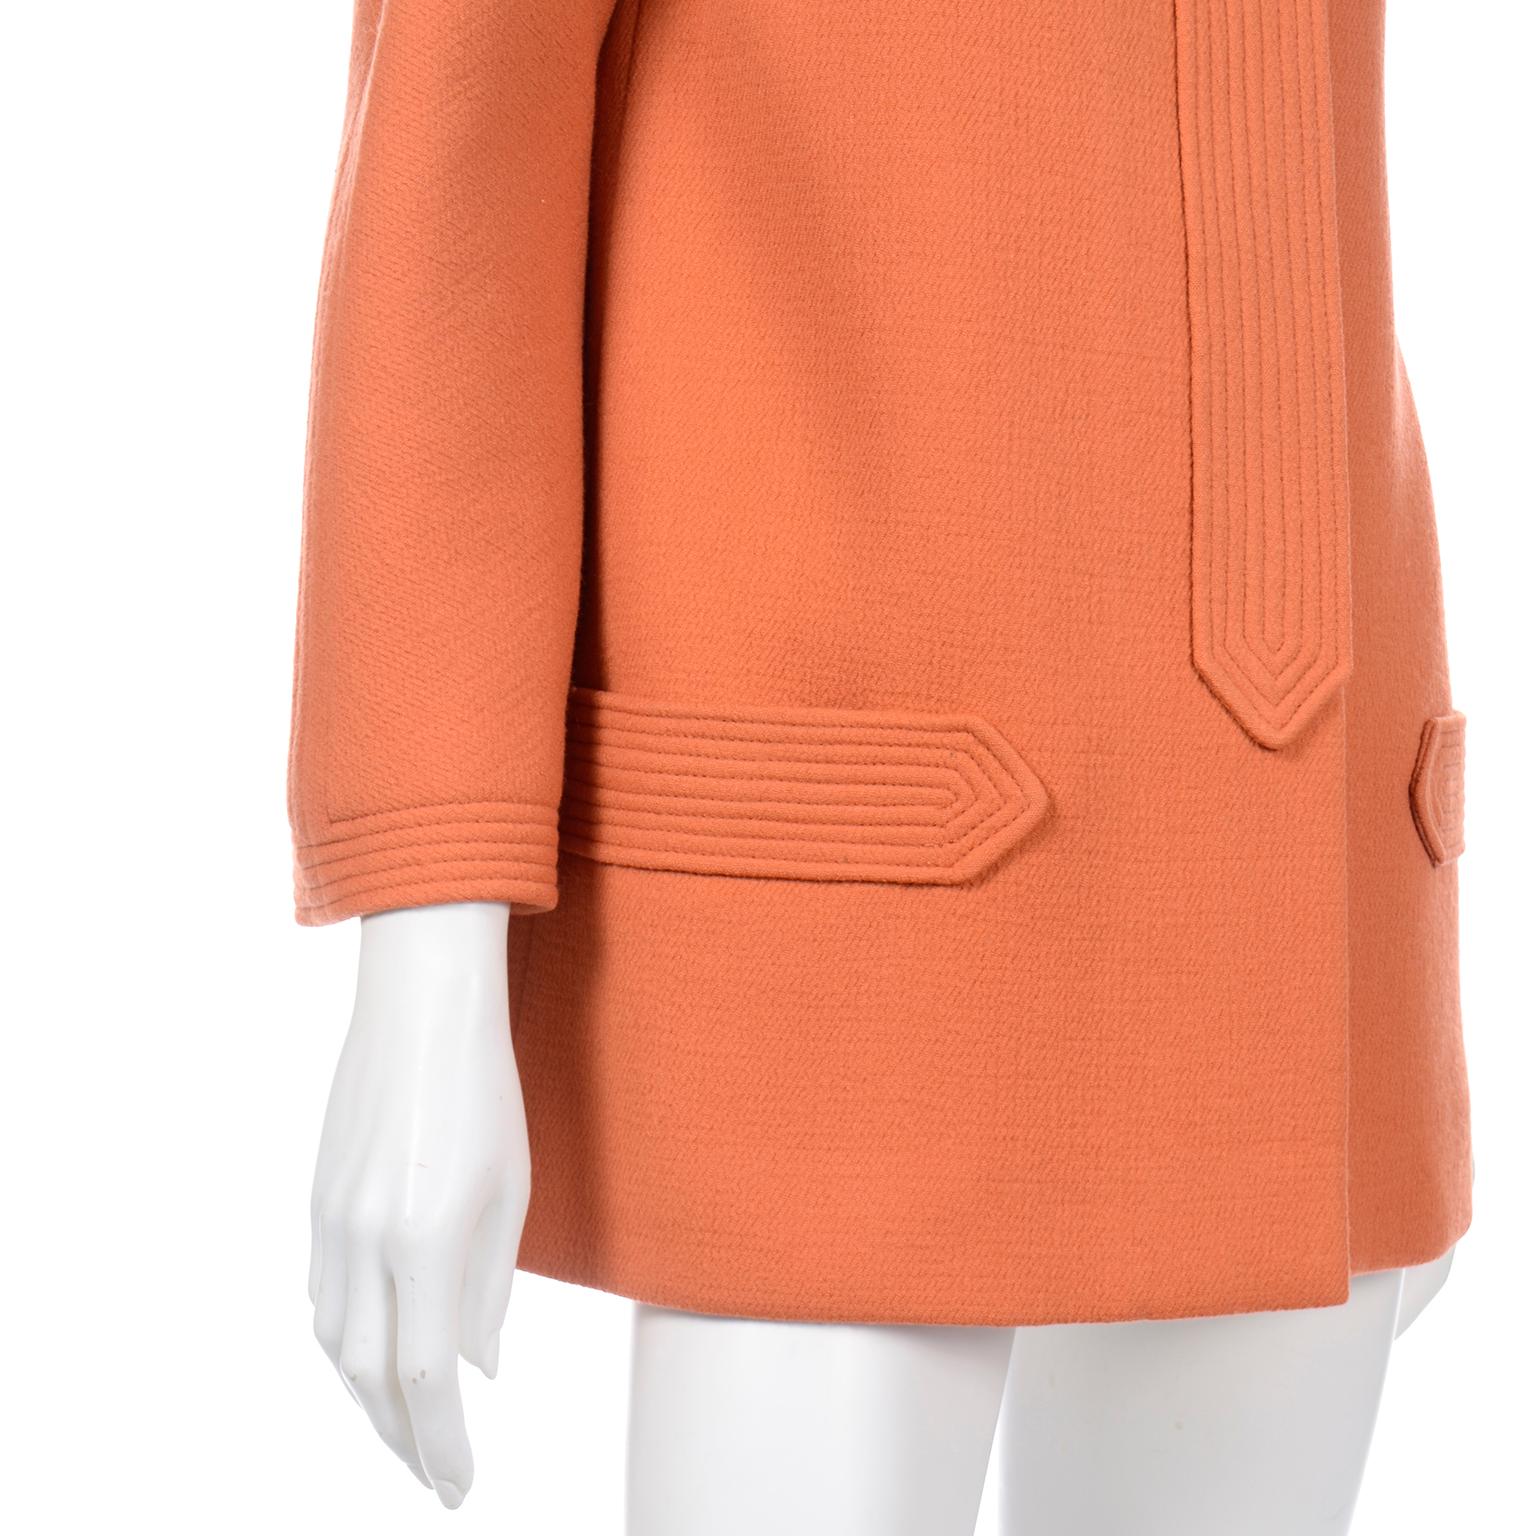 Pierre Cardin Vintage Orange Wool Jacket or Short Coat Late 1960s Early  1970s For Sale at 1stDibs